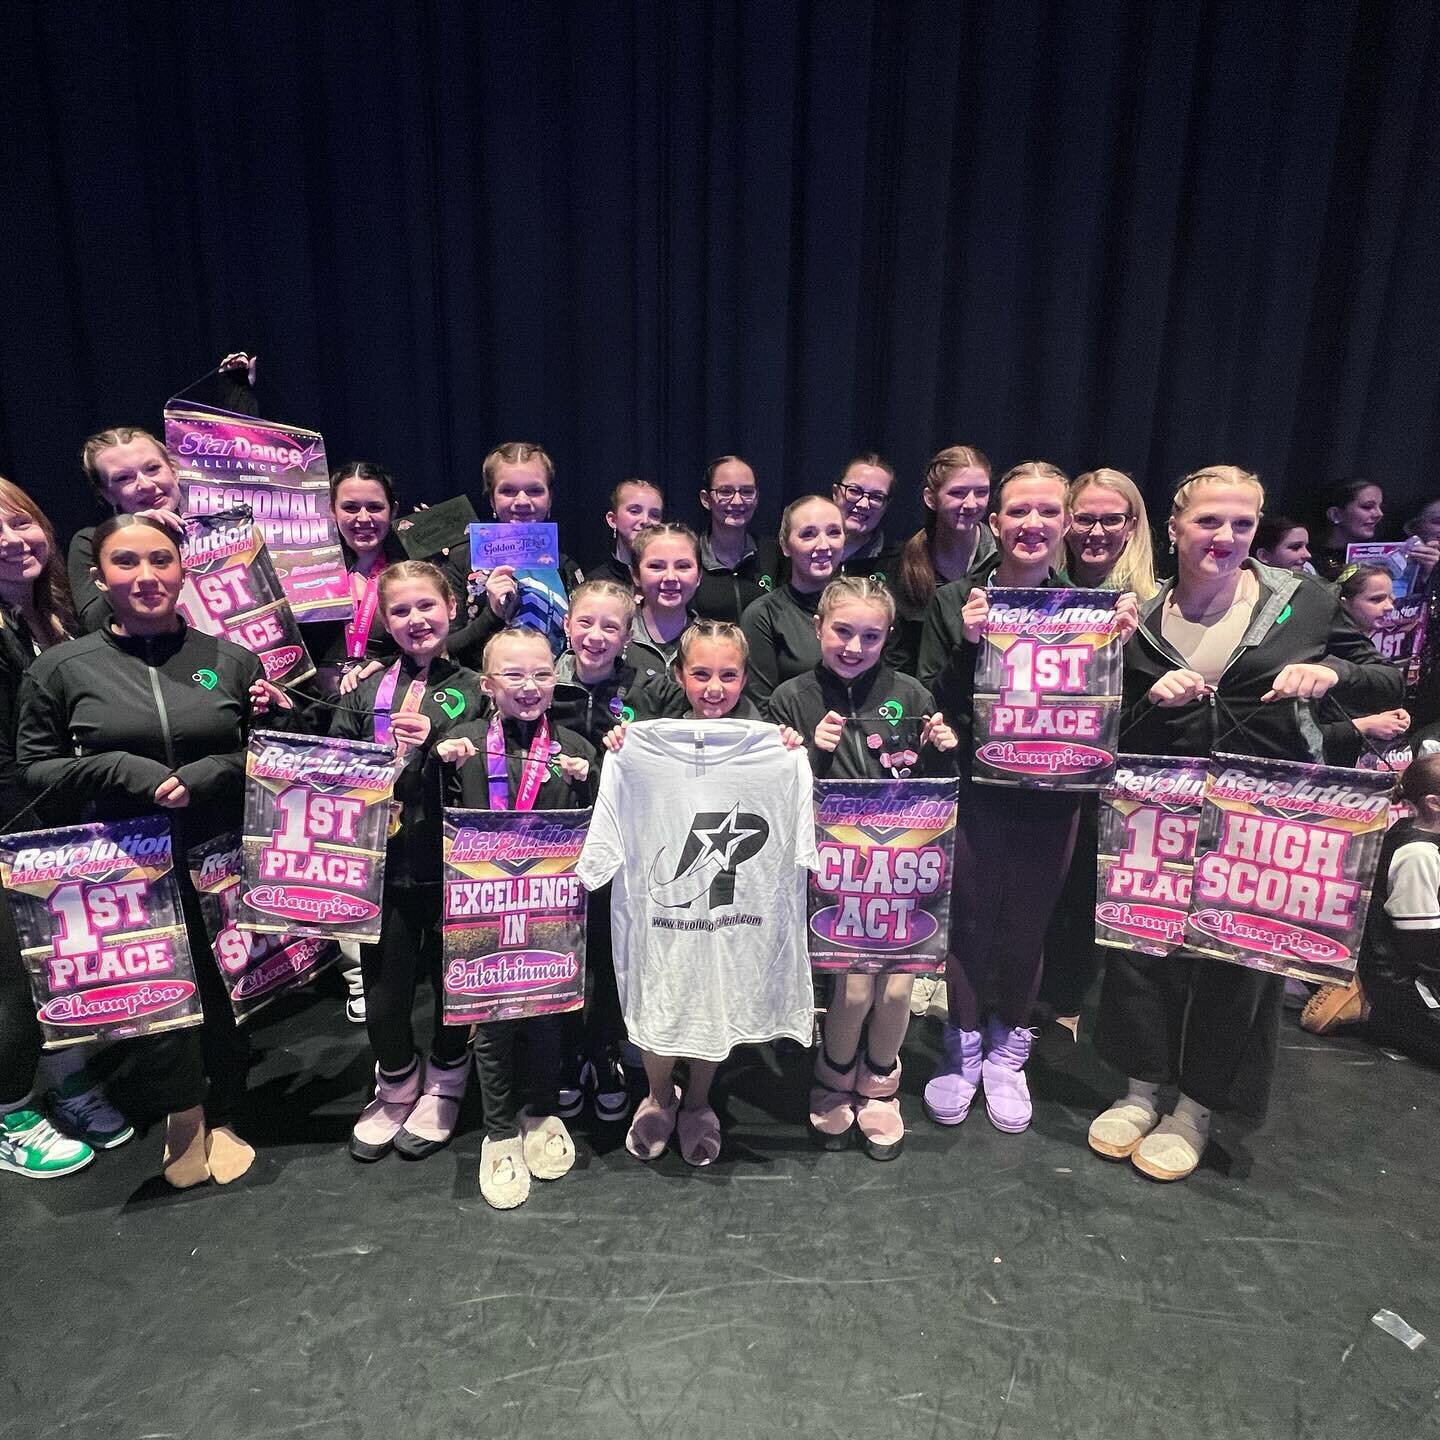 Amazing session for DI! Check out our results below (and make sure to read ALL THE WAY to the end)
✨Stay: platinum, category 1st, 1st overall Level 2 Small Groups 15-19, golden ticket, SDA Level 2 regional champion 
✨ - You Gotta Fight: elite gold, c